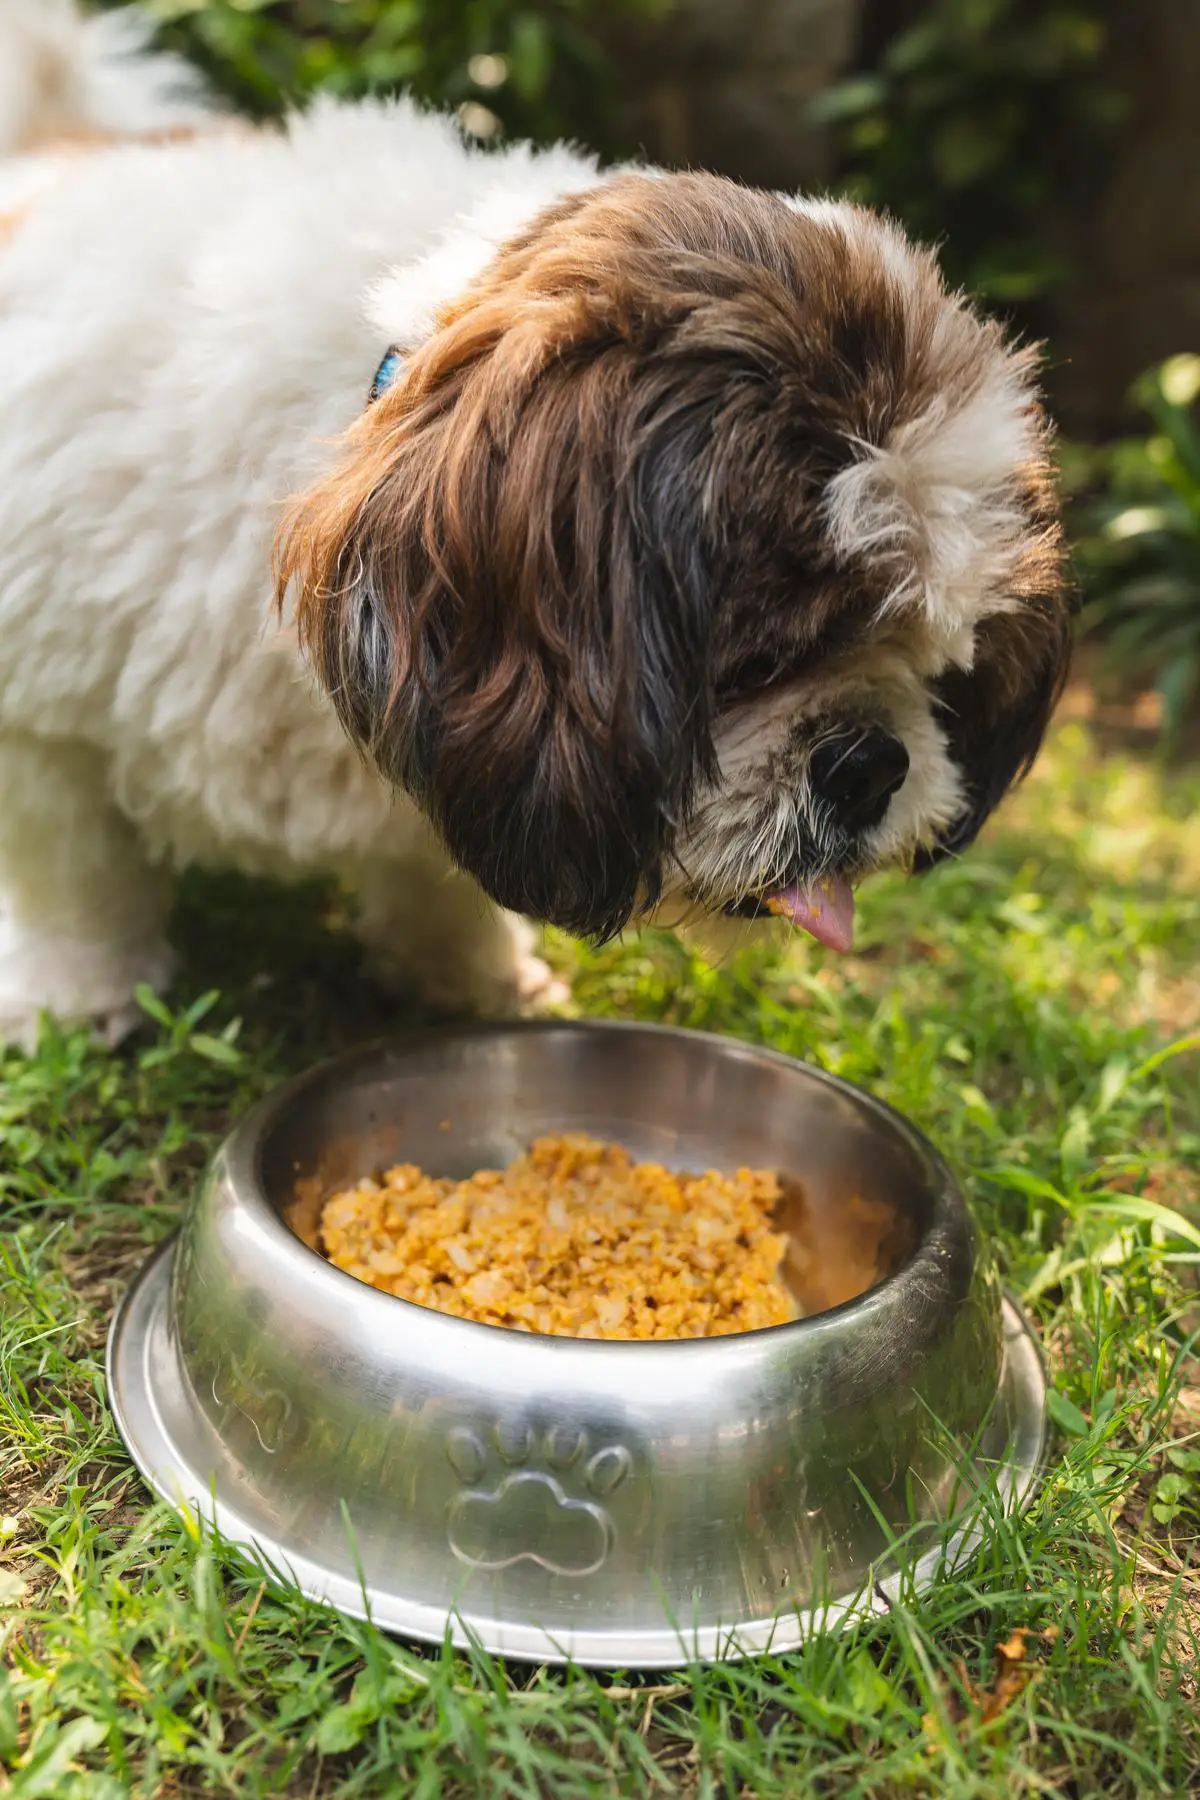 A product image of Kirkland dog food, showing a dog happily eating from a bowl.